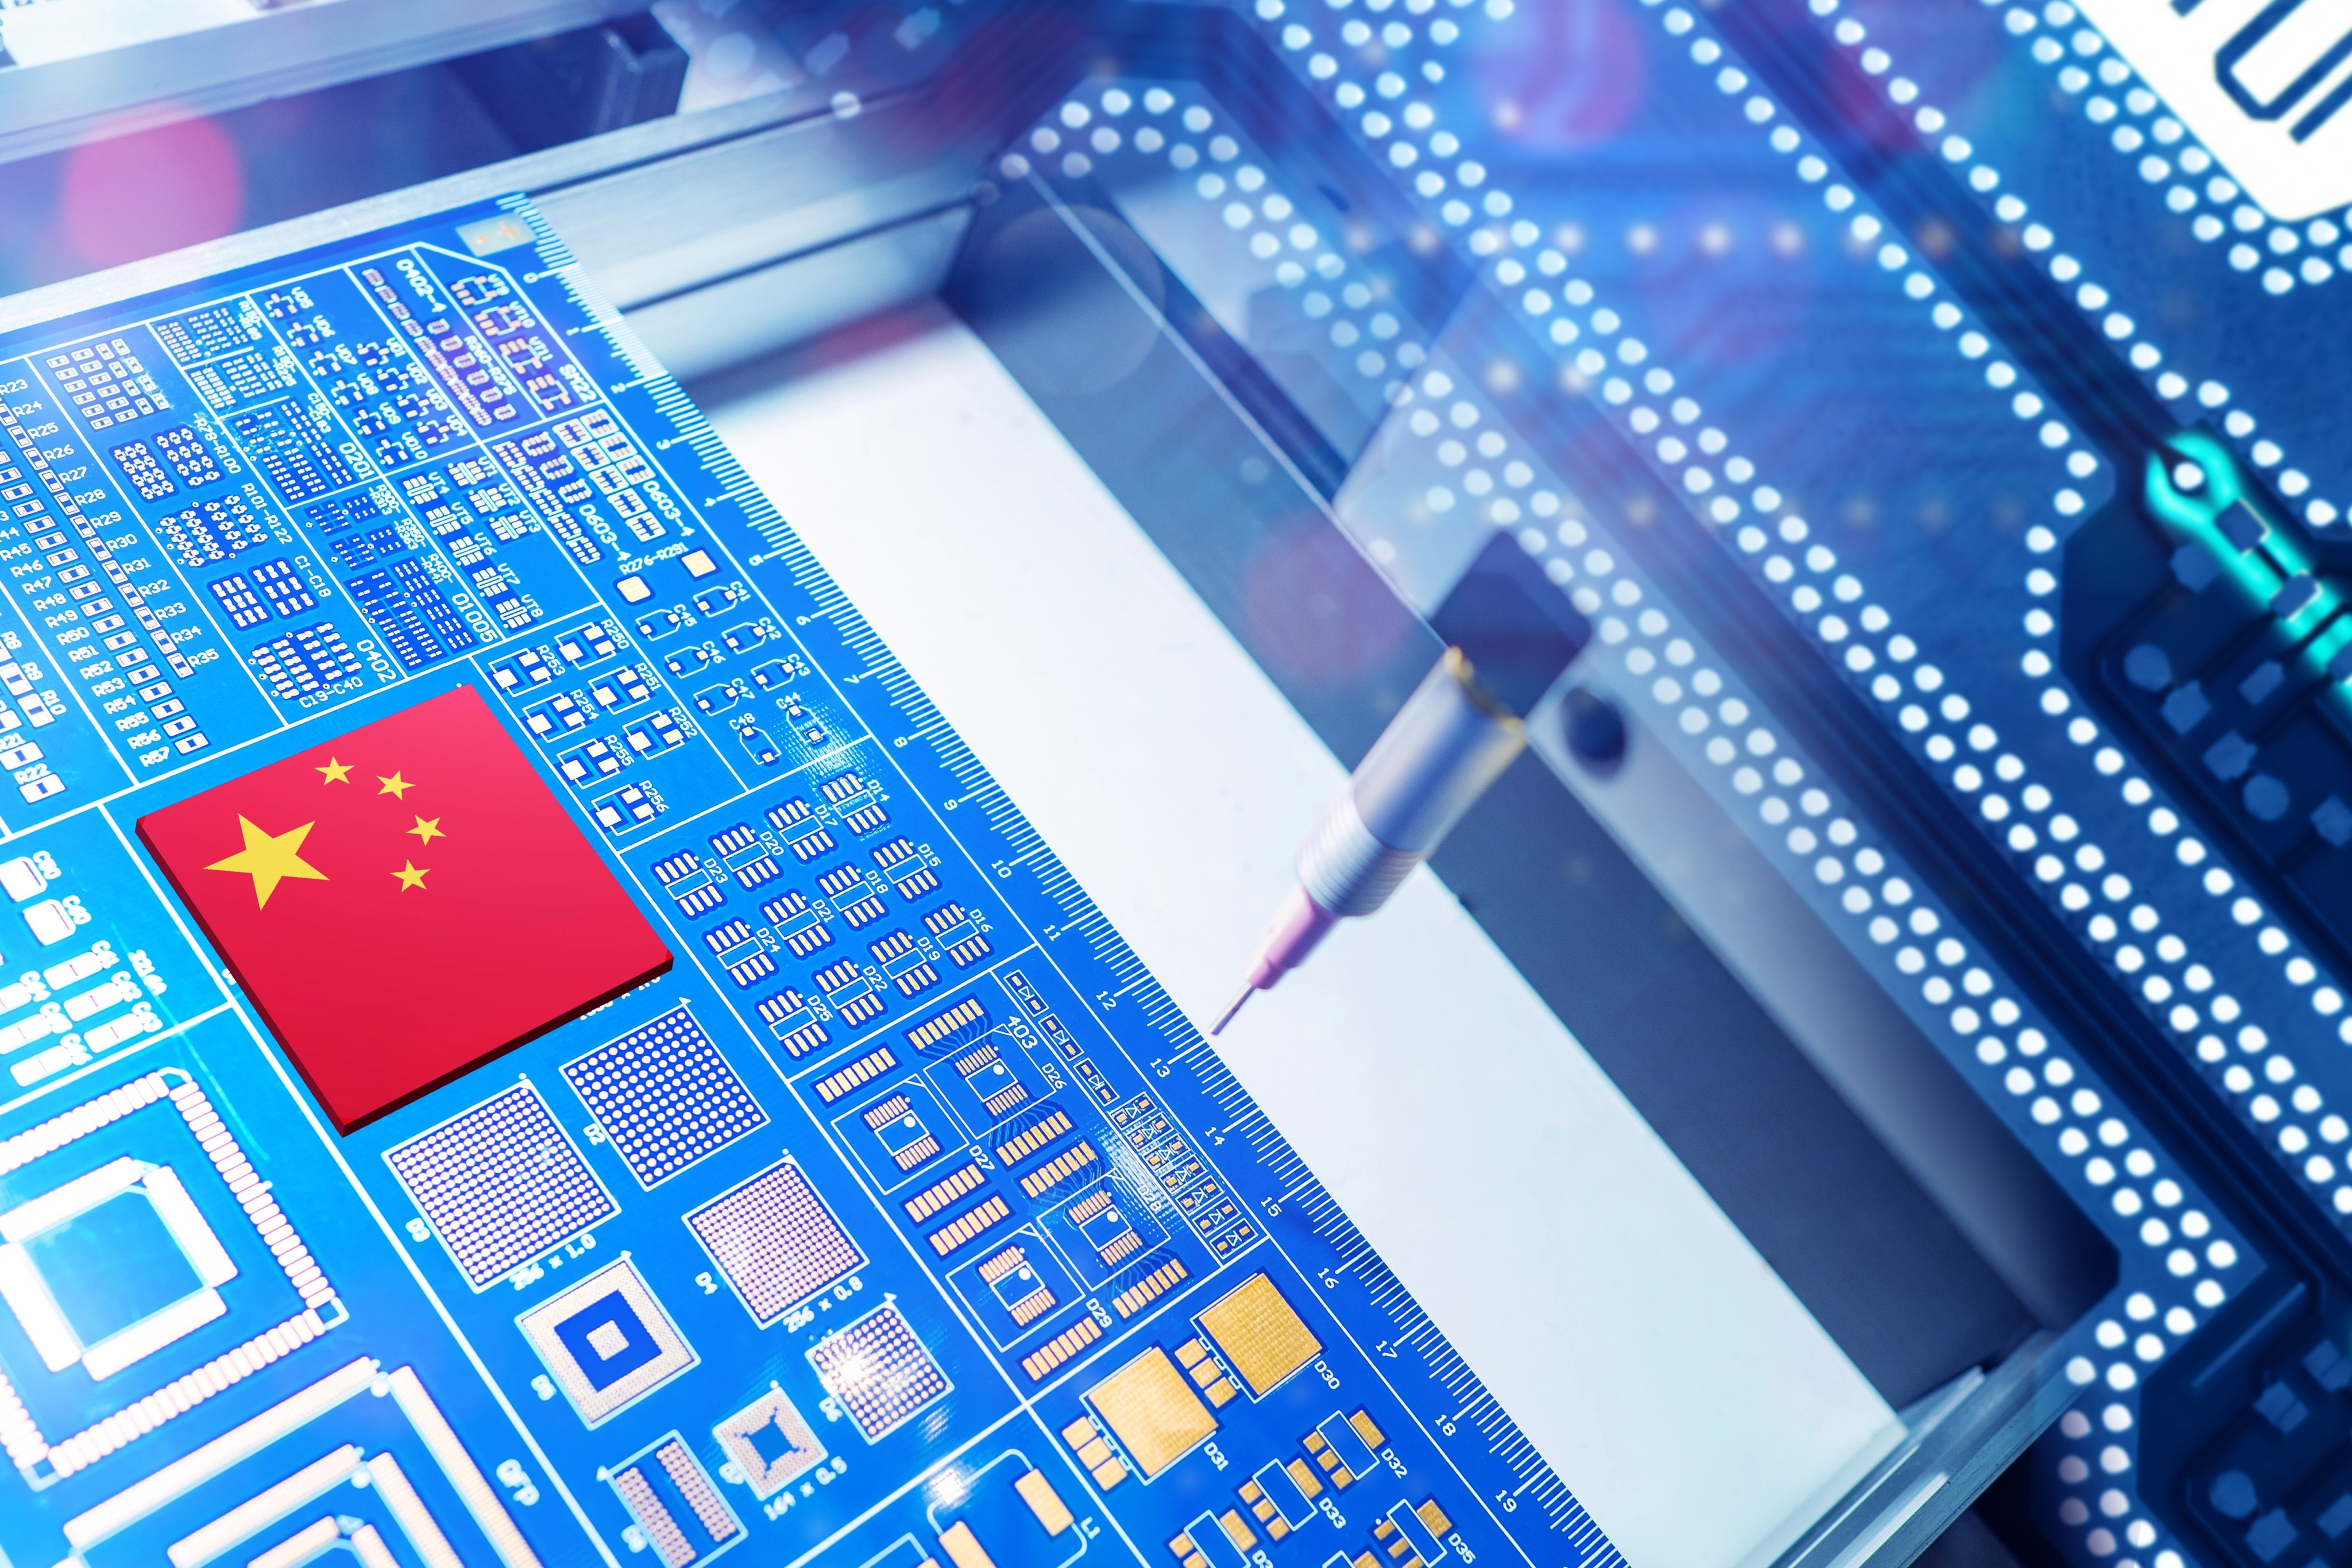 Chiplets, pre-developed silicon dies that can be packaged into a more complex processor, have gained much interest in mainland China because they reduce design costs. Photo: Shutterstock